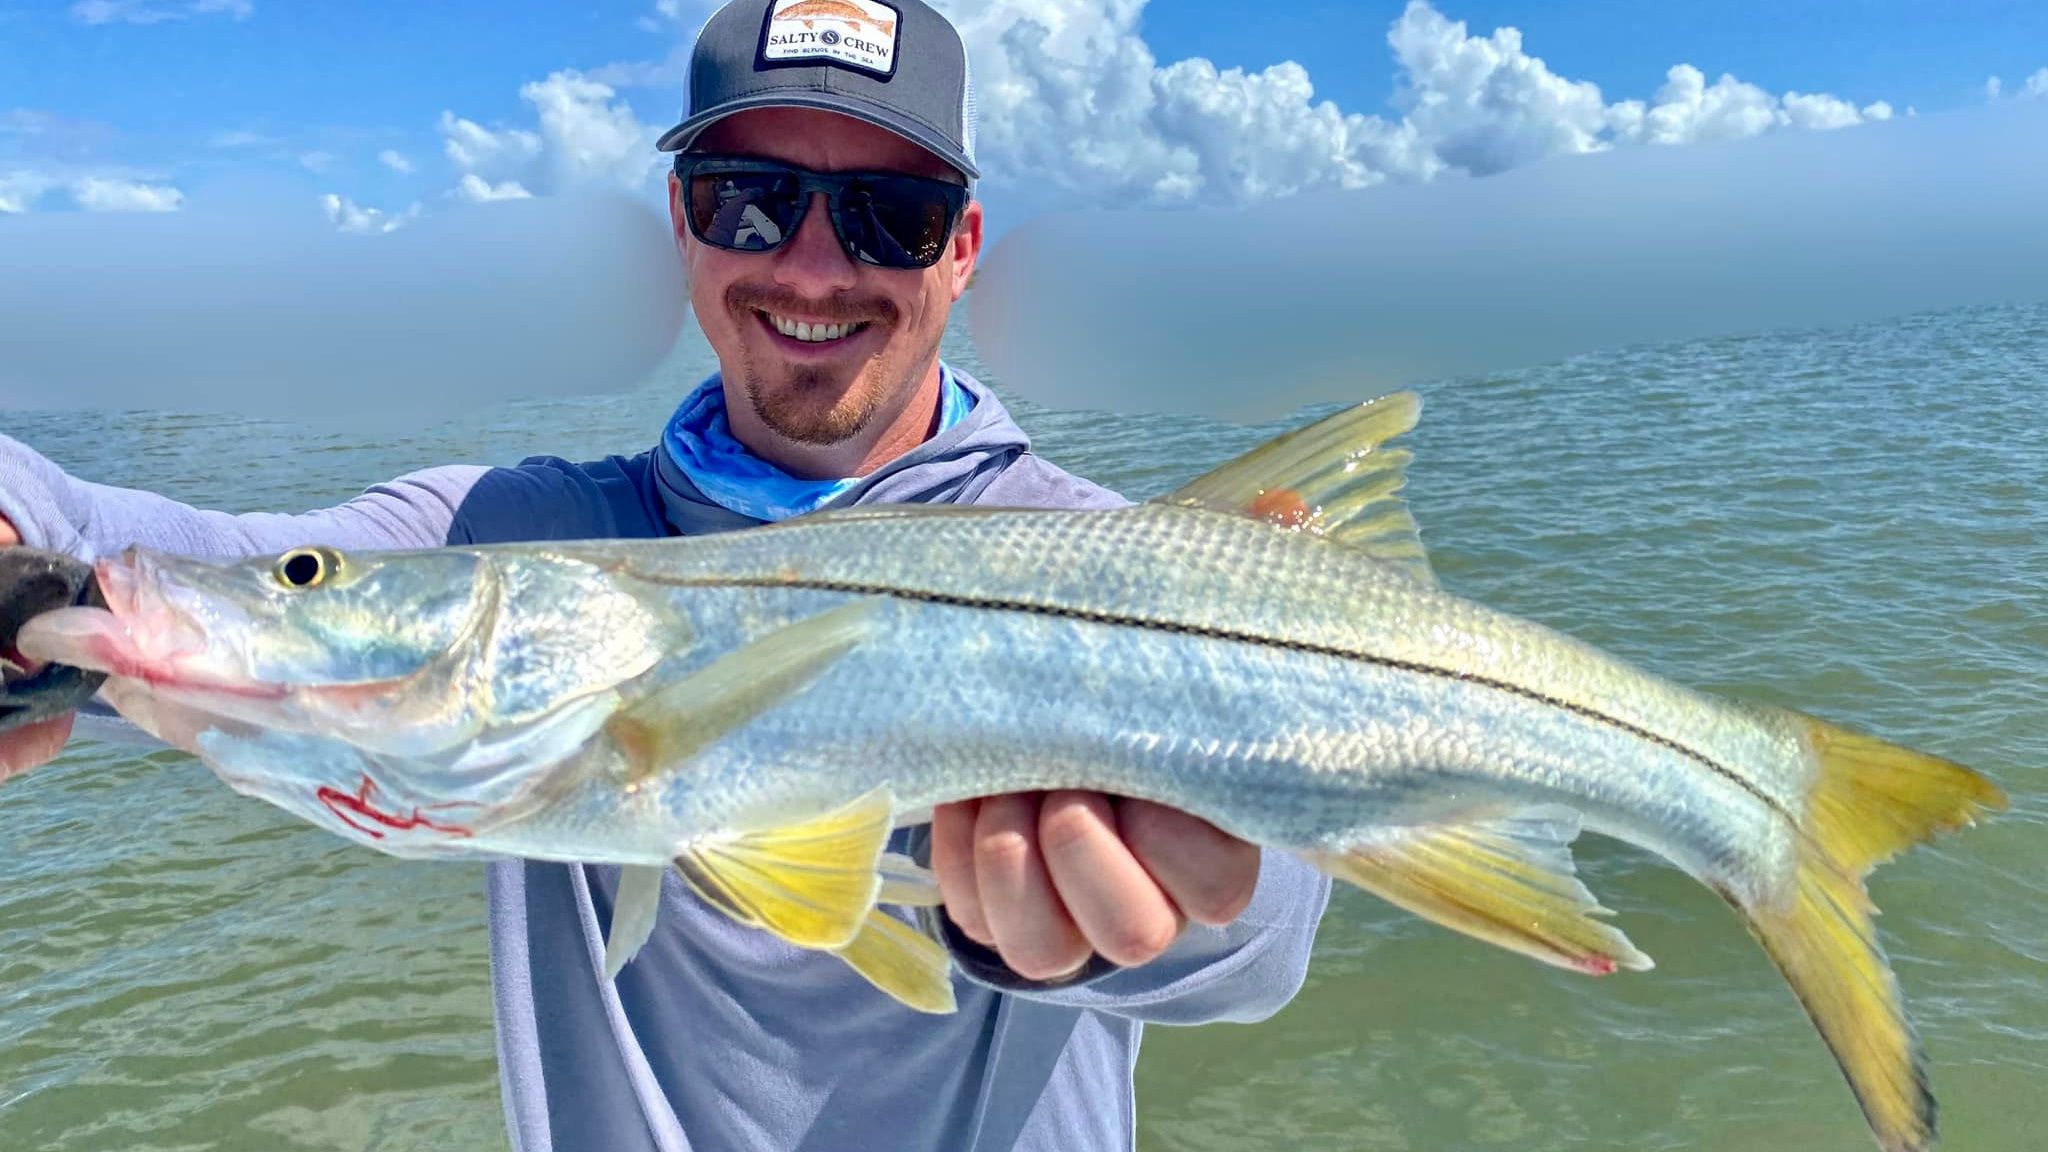 Reel Adventures Full Day Trip - South Padre Island Fishing Charter fishing Inshore